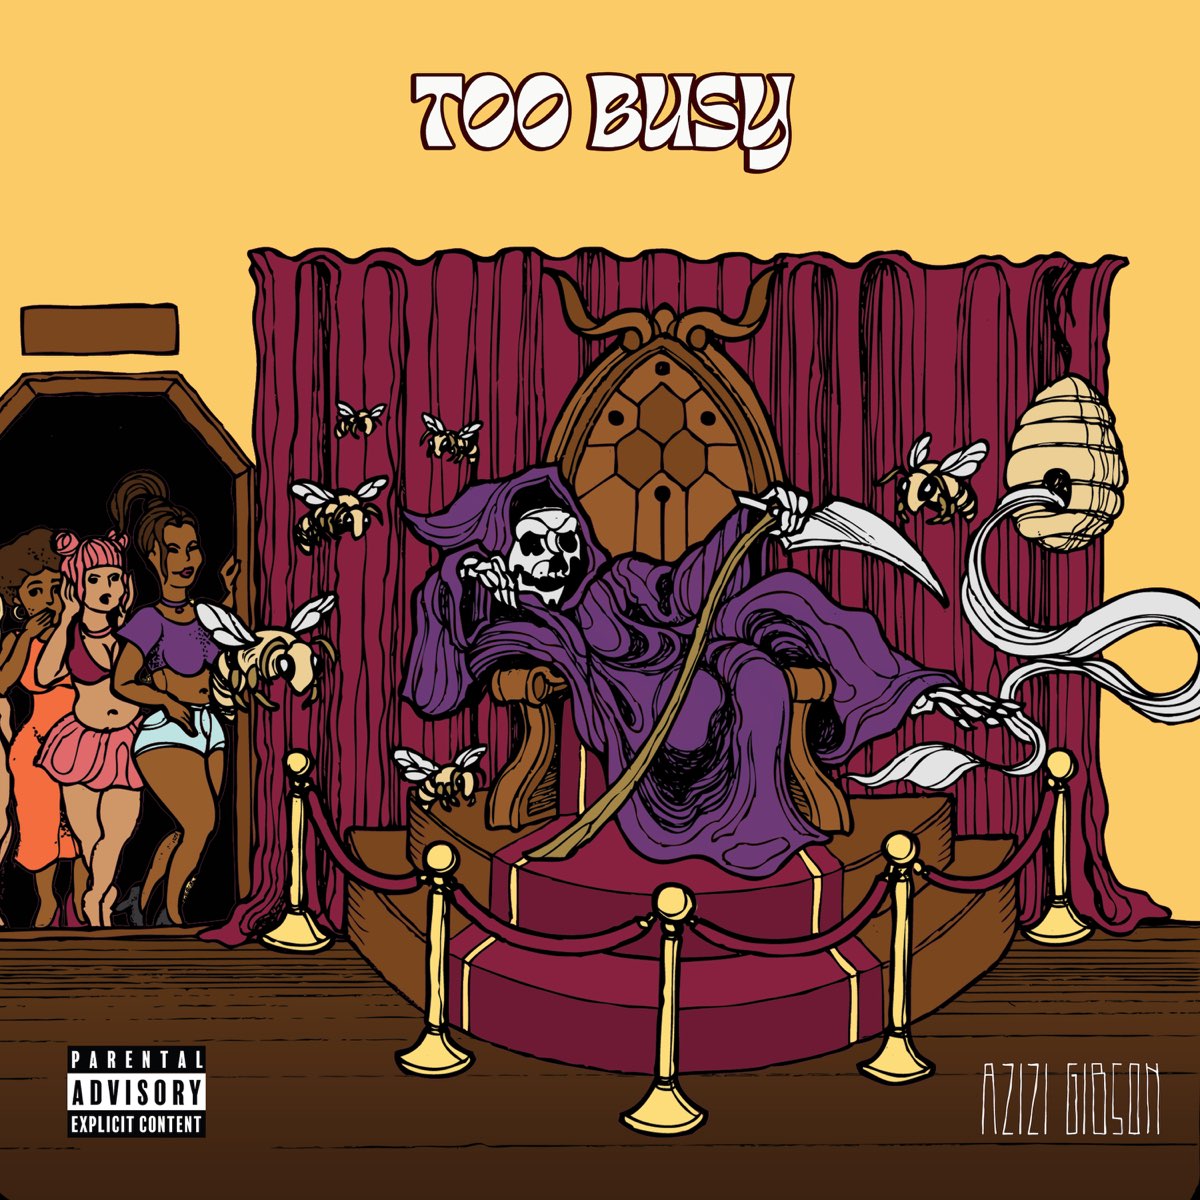 Azizi Gibson - 'Too Busy' [Official Ringtone for Android]